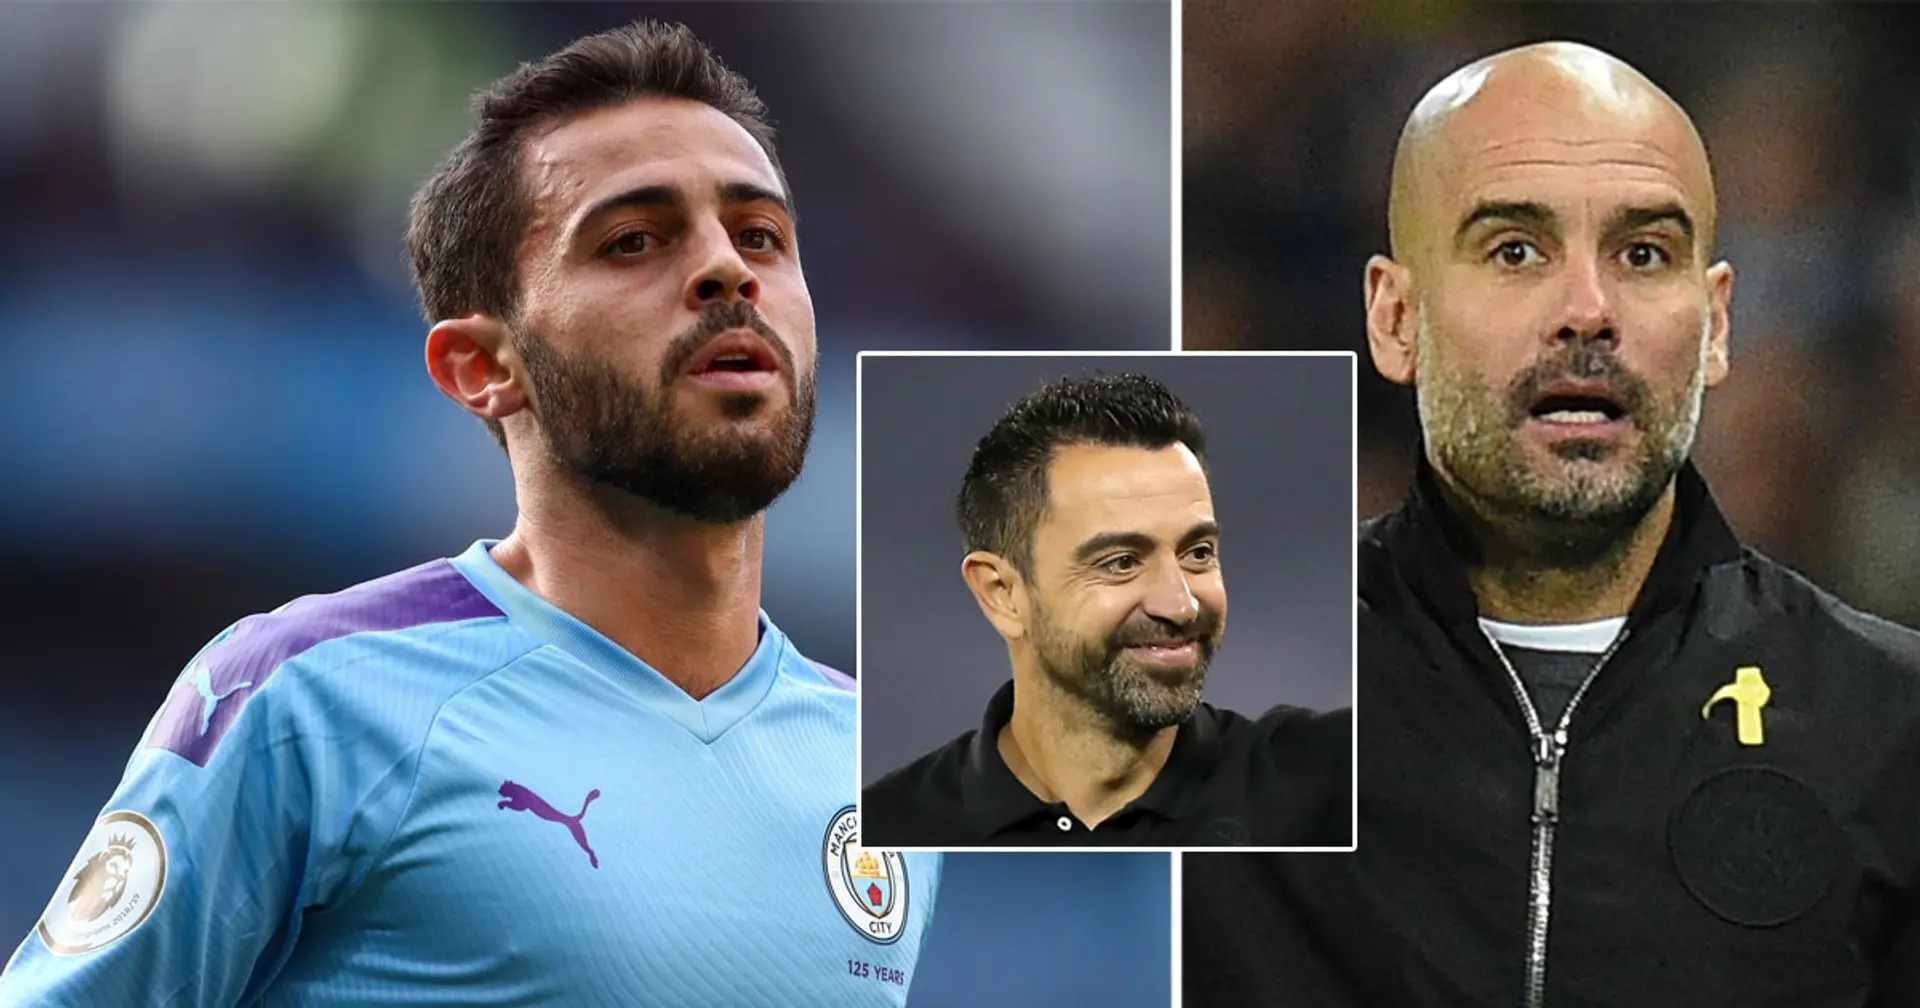 Bernardo has special agreement with Guardiola that would allow him to join Barca: COPE